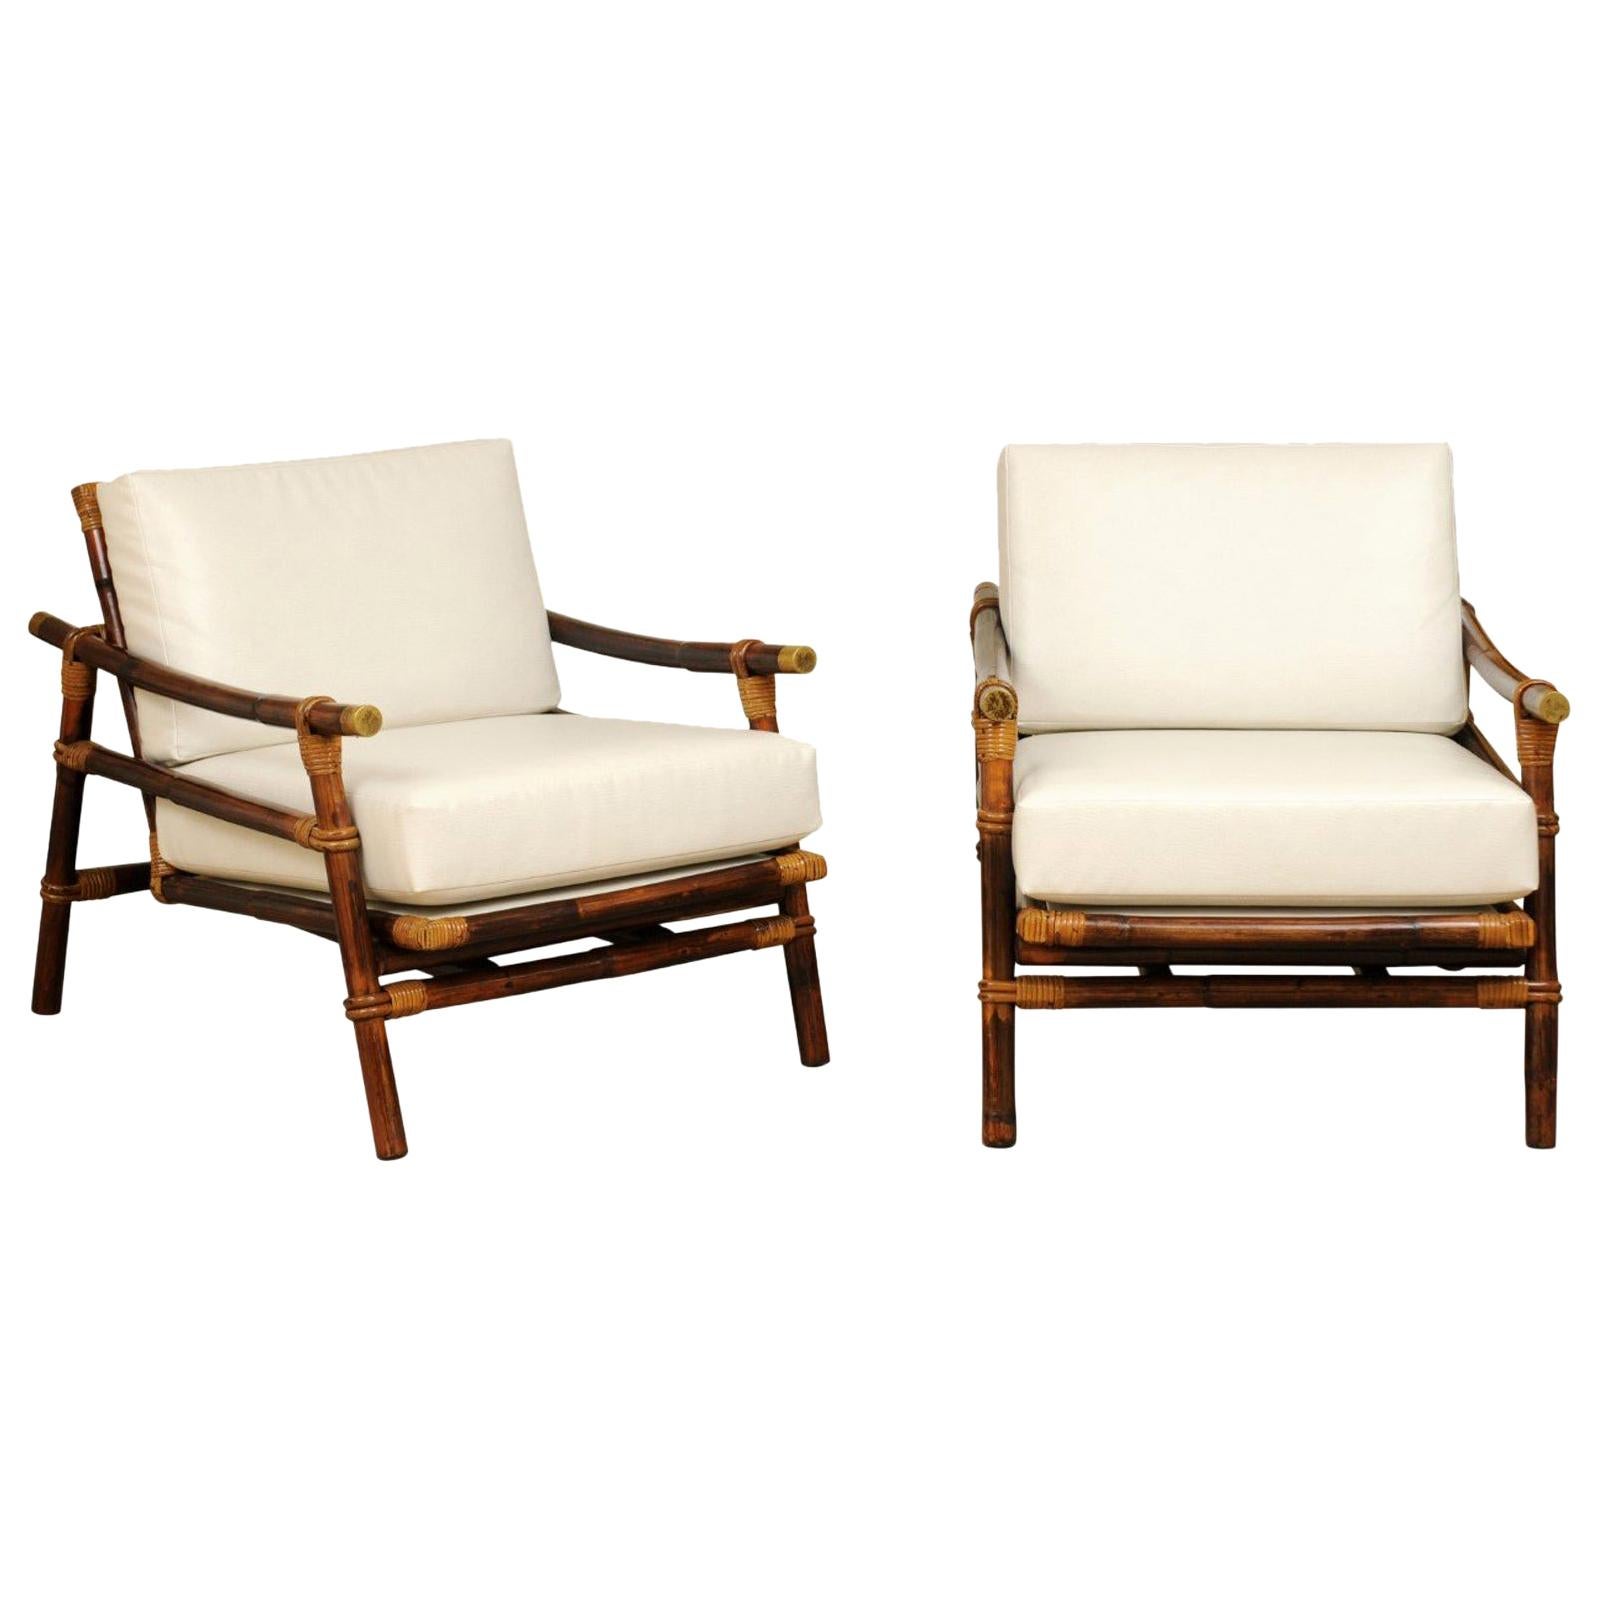 Superb Restored Pair of Campaign Loungers by Wisner for Ficks Reed, circa 1954